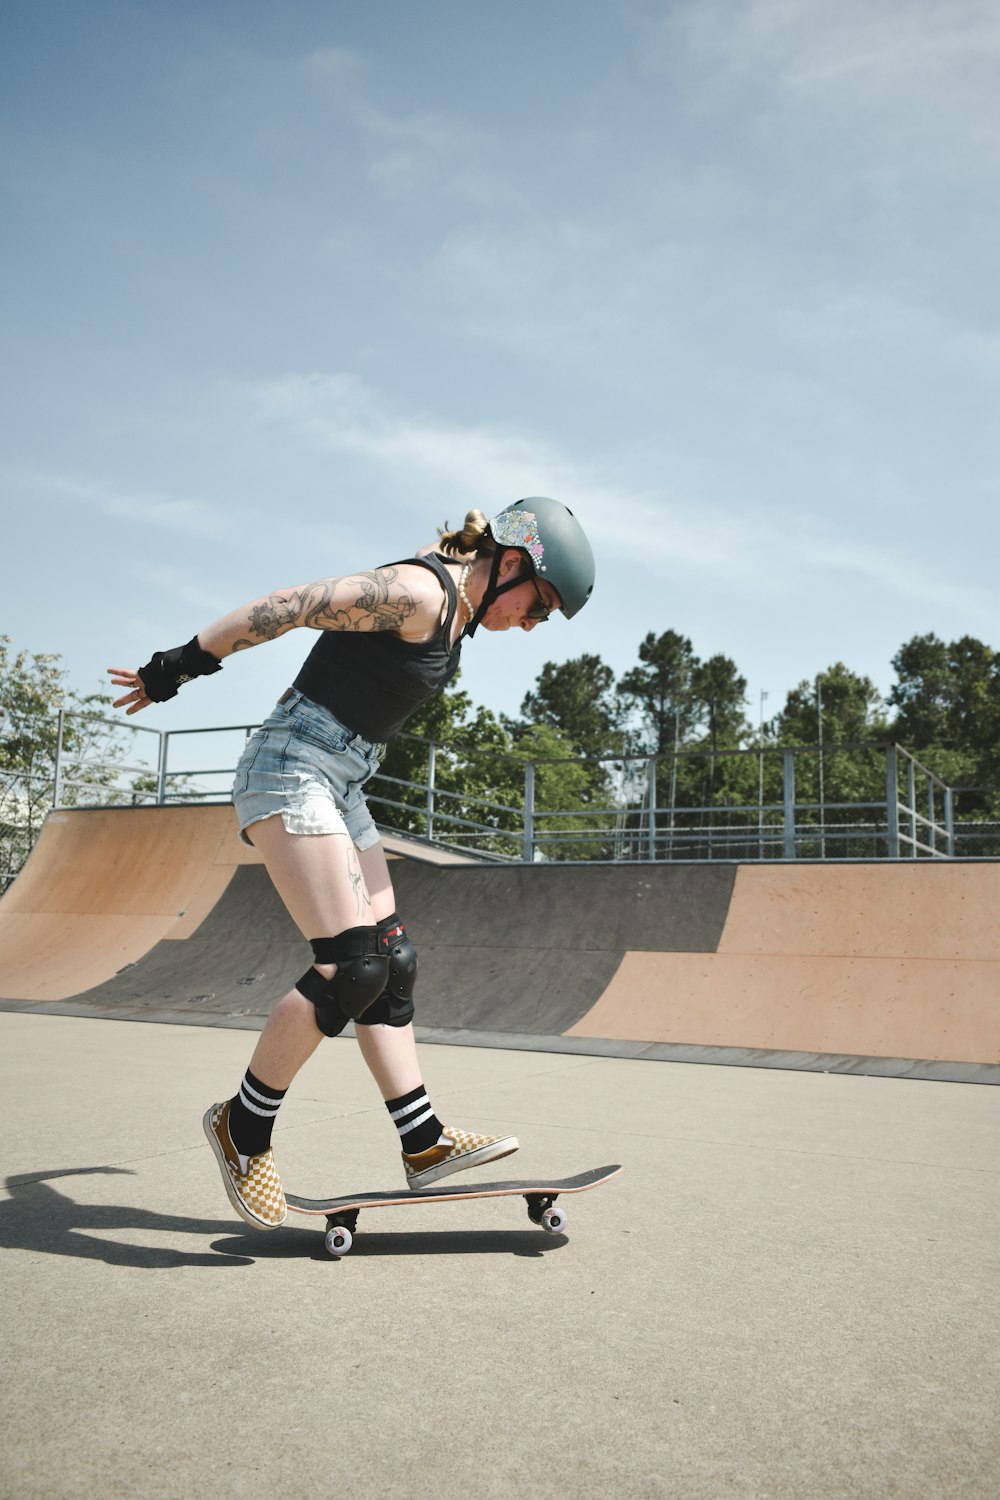 a person skating on a ramp